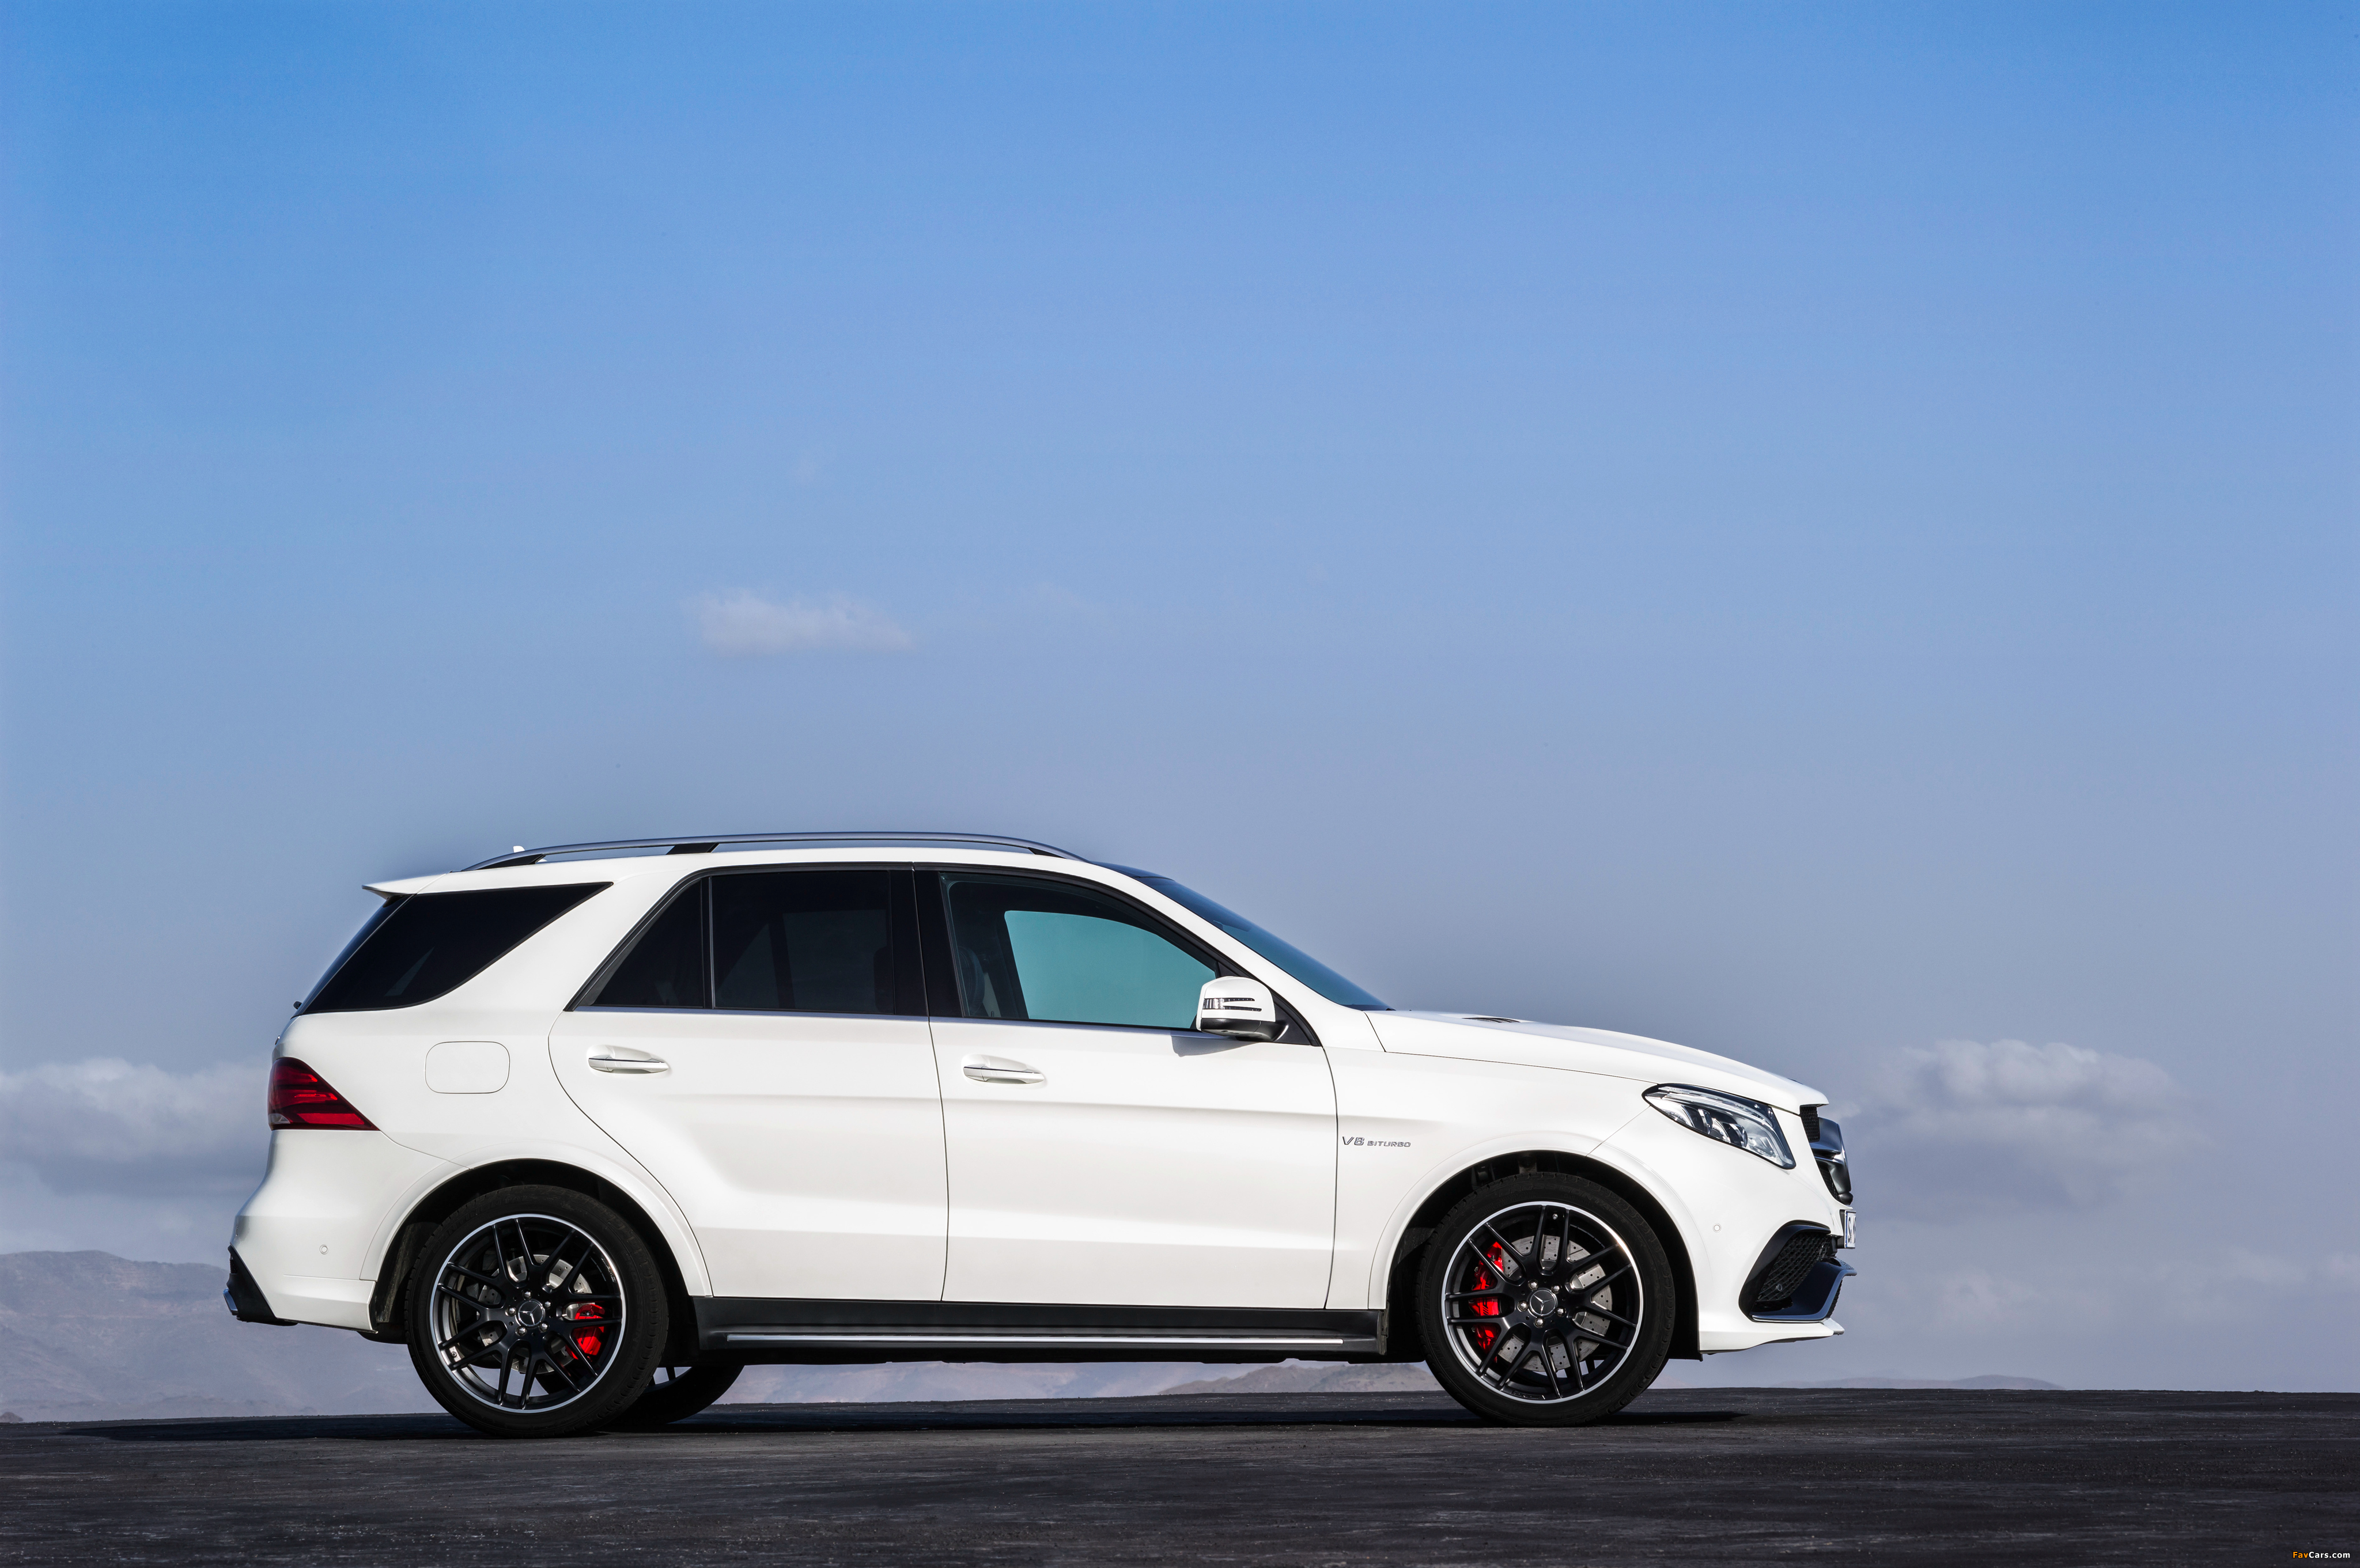 Mercedes-AMG GLE 63 S 4MATIC (W166) 2015 pictures (4096 x 2722)